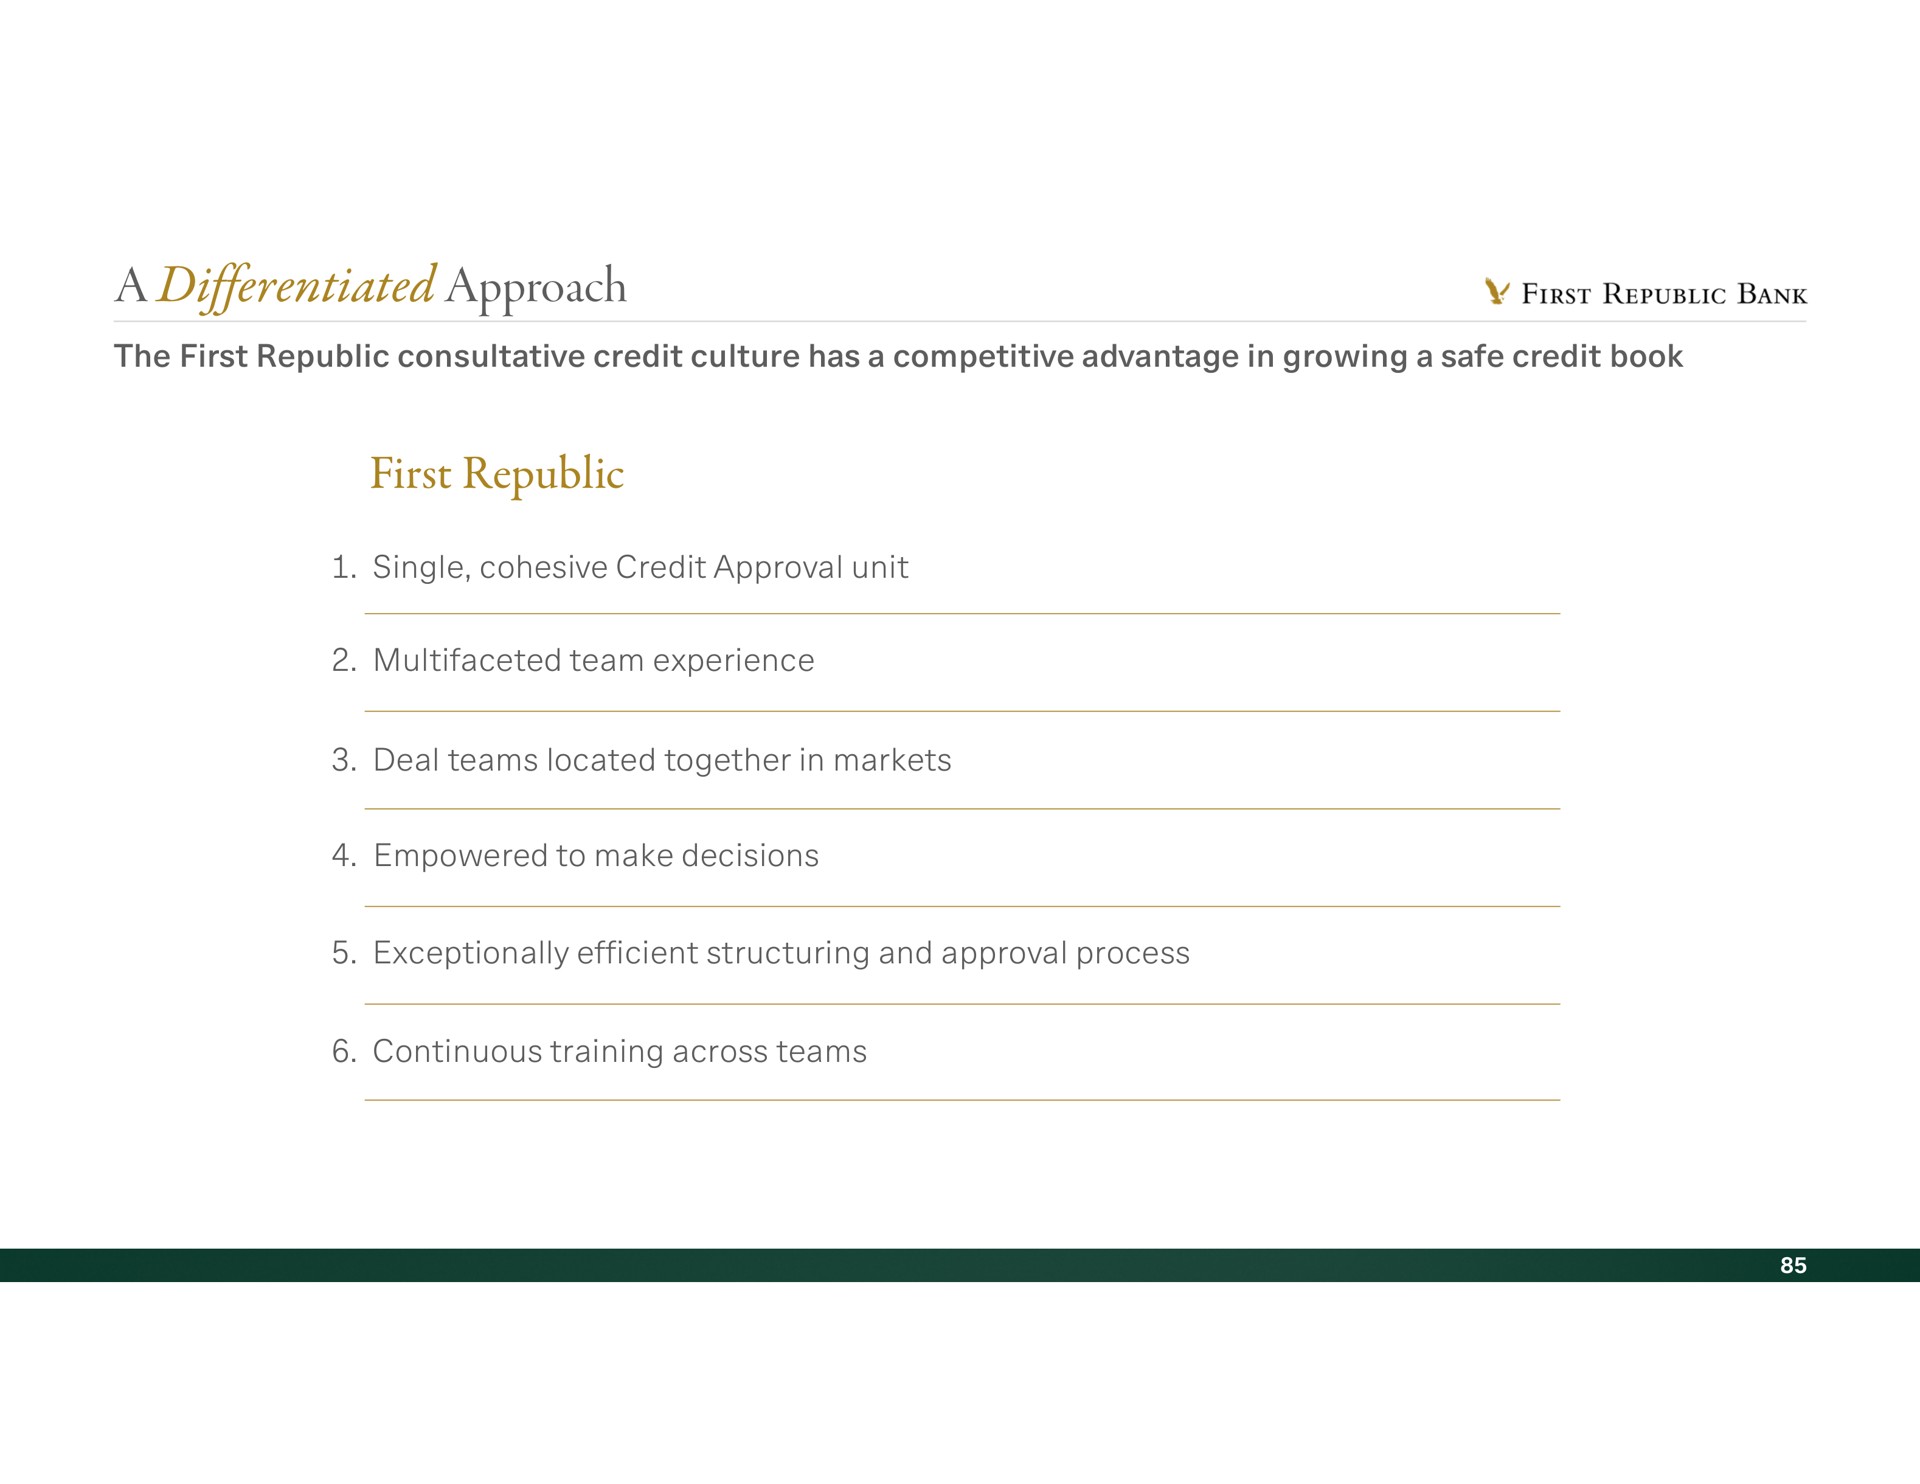 a differentiated approach first republic | First Republic Bank